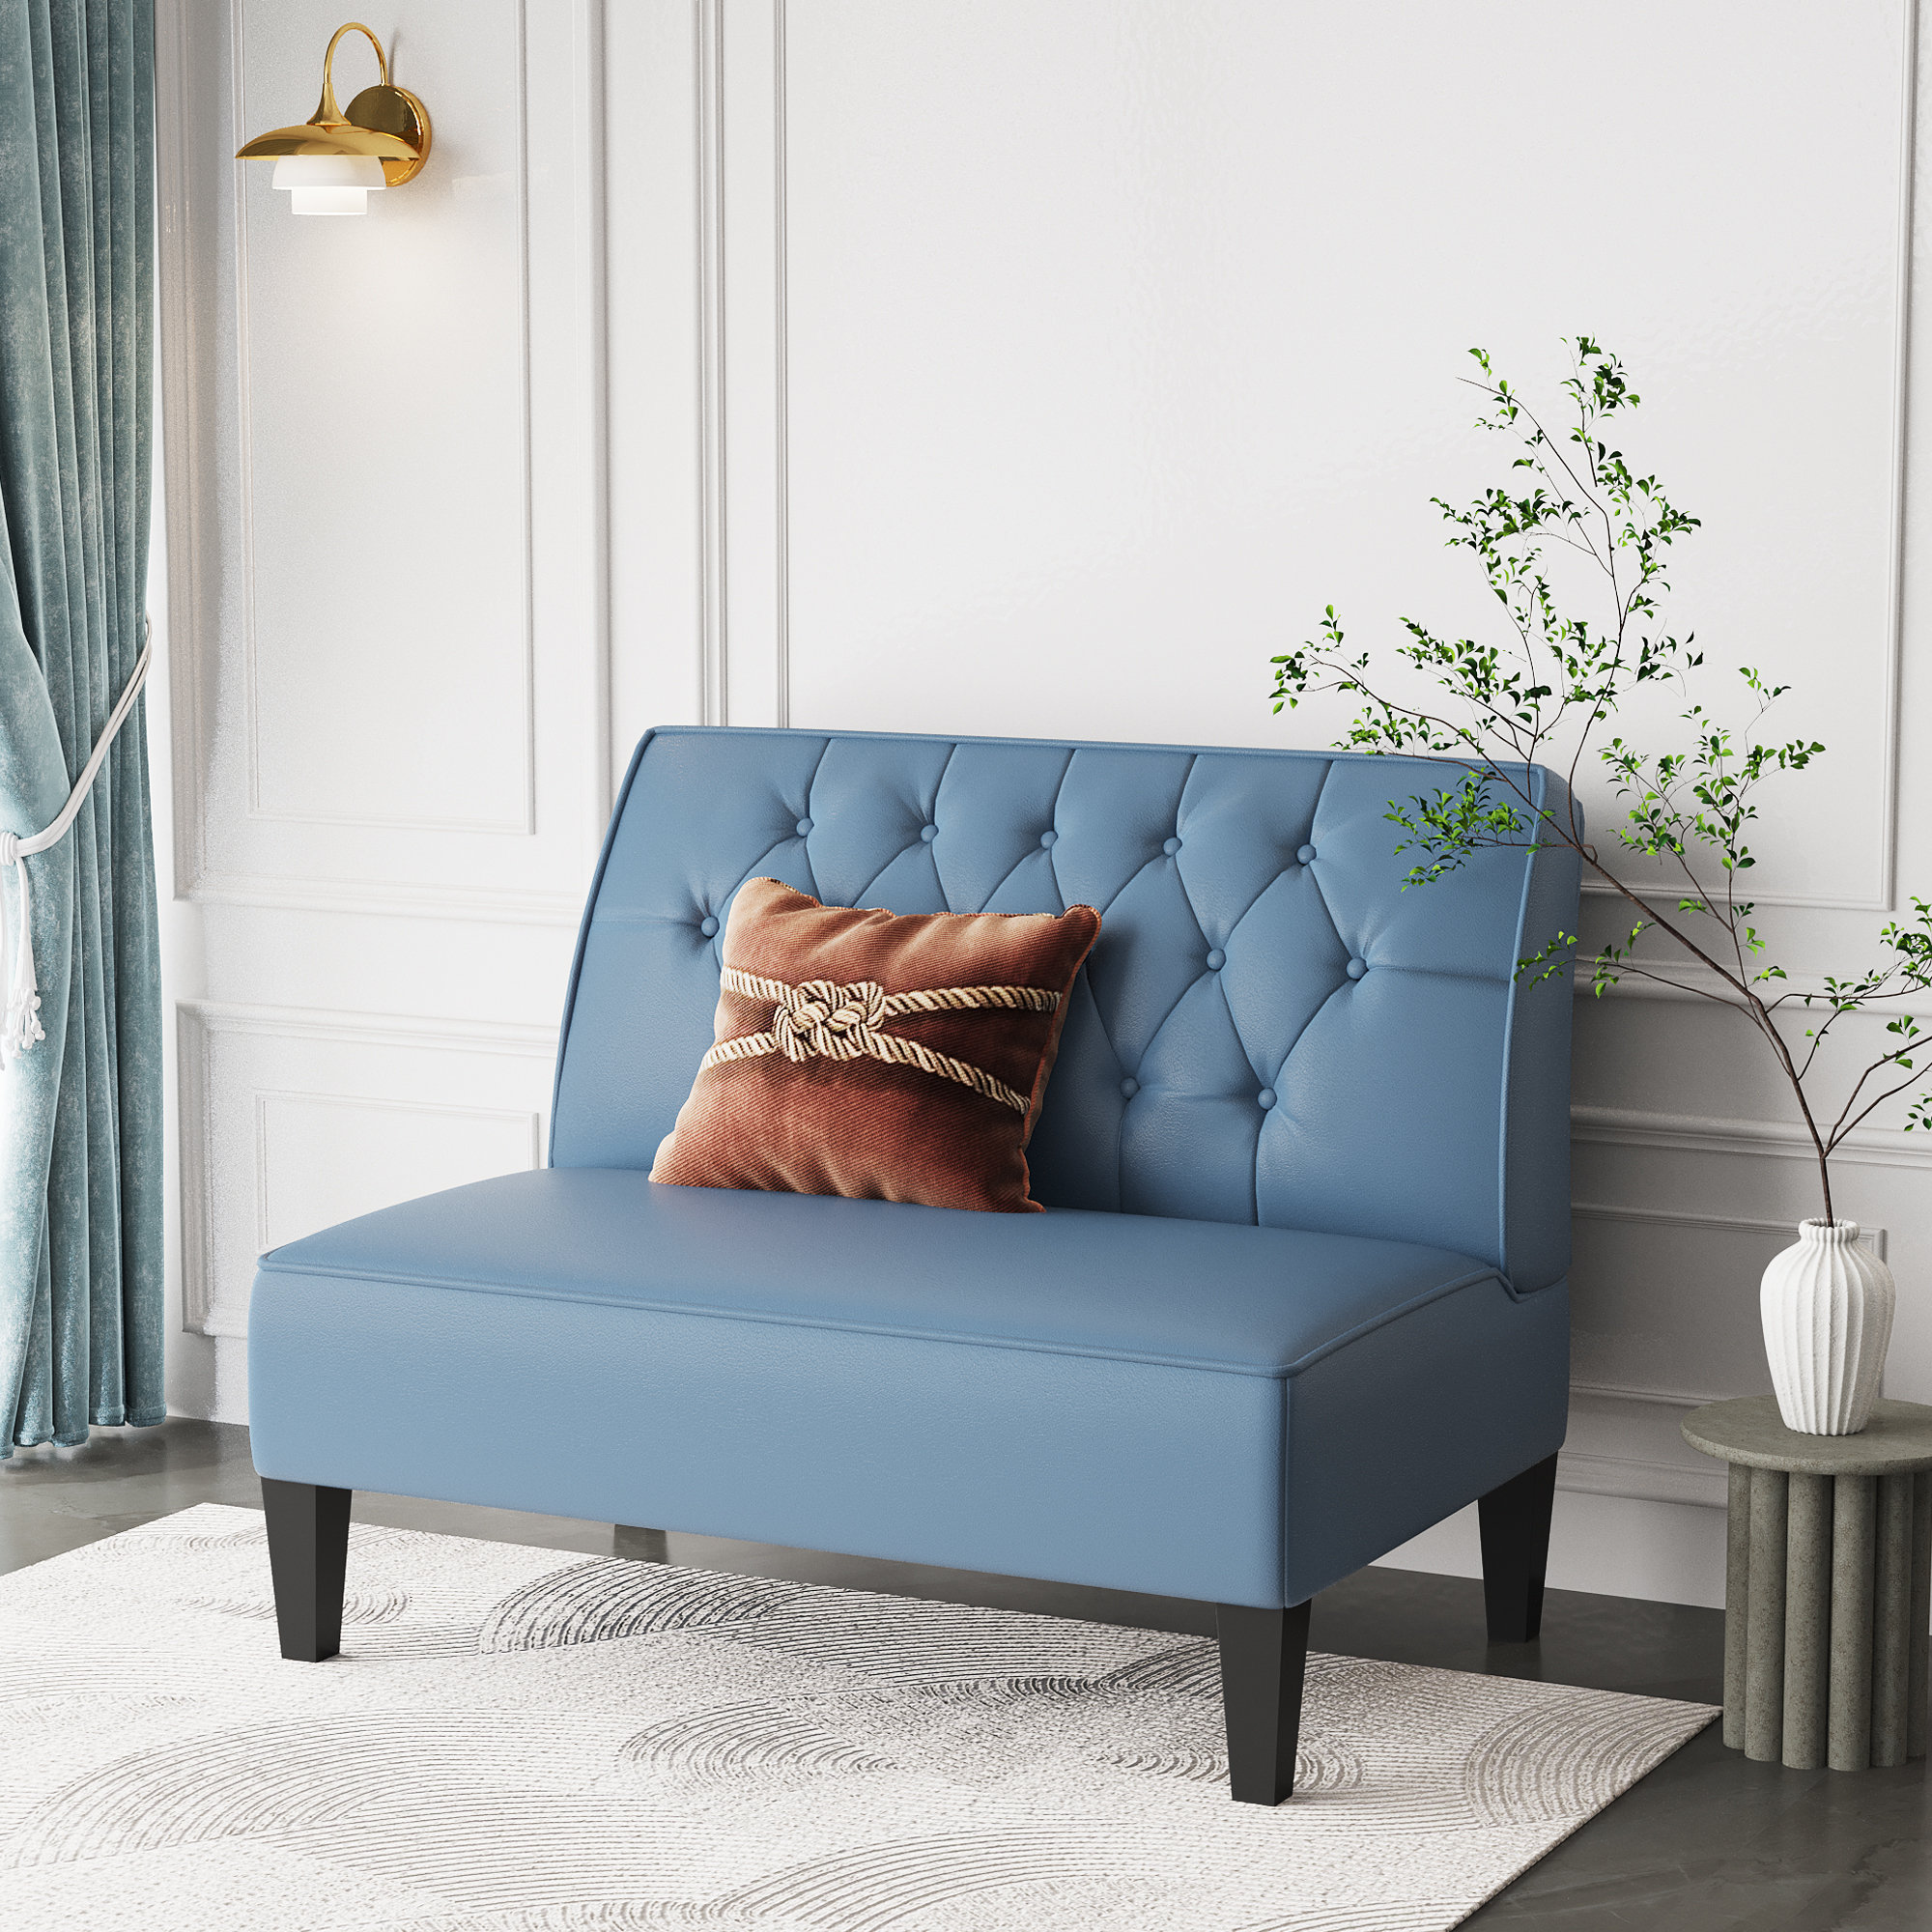 N&V Single Seated Foam Sofa, Armless Floor Sofa, One Piece High Density Foam, Removable and Machine Washable Cover, Blue